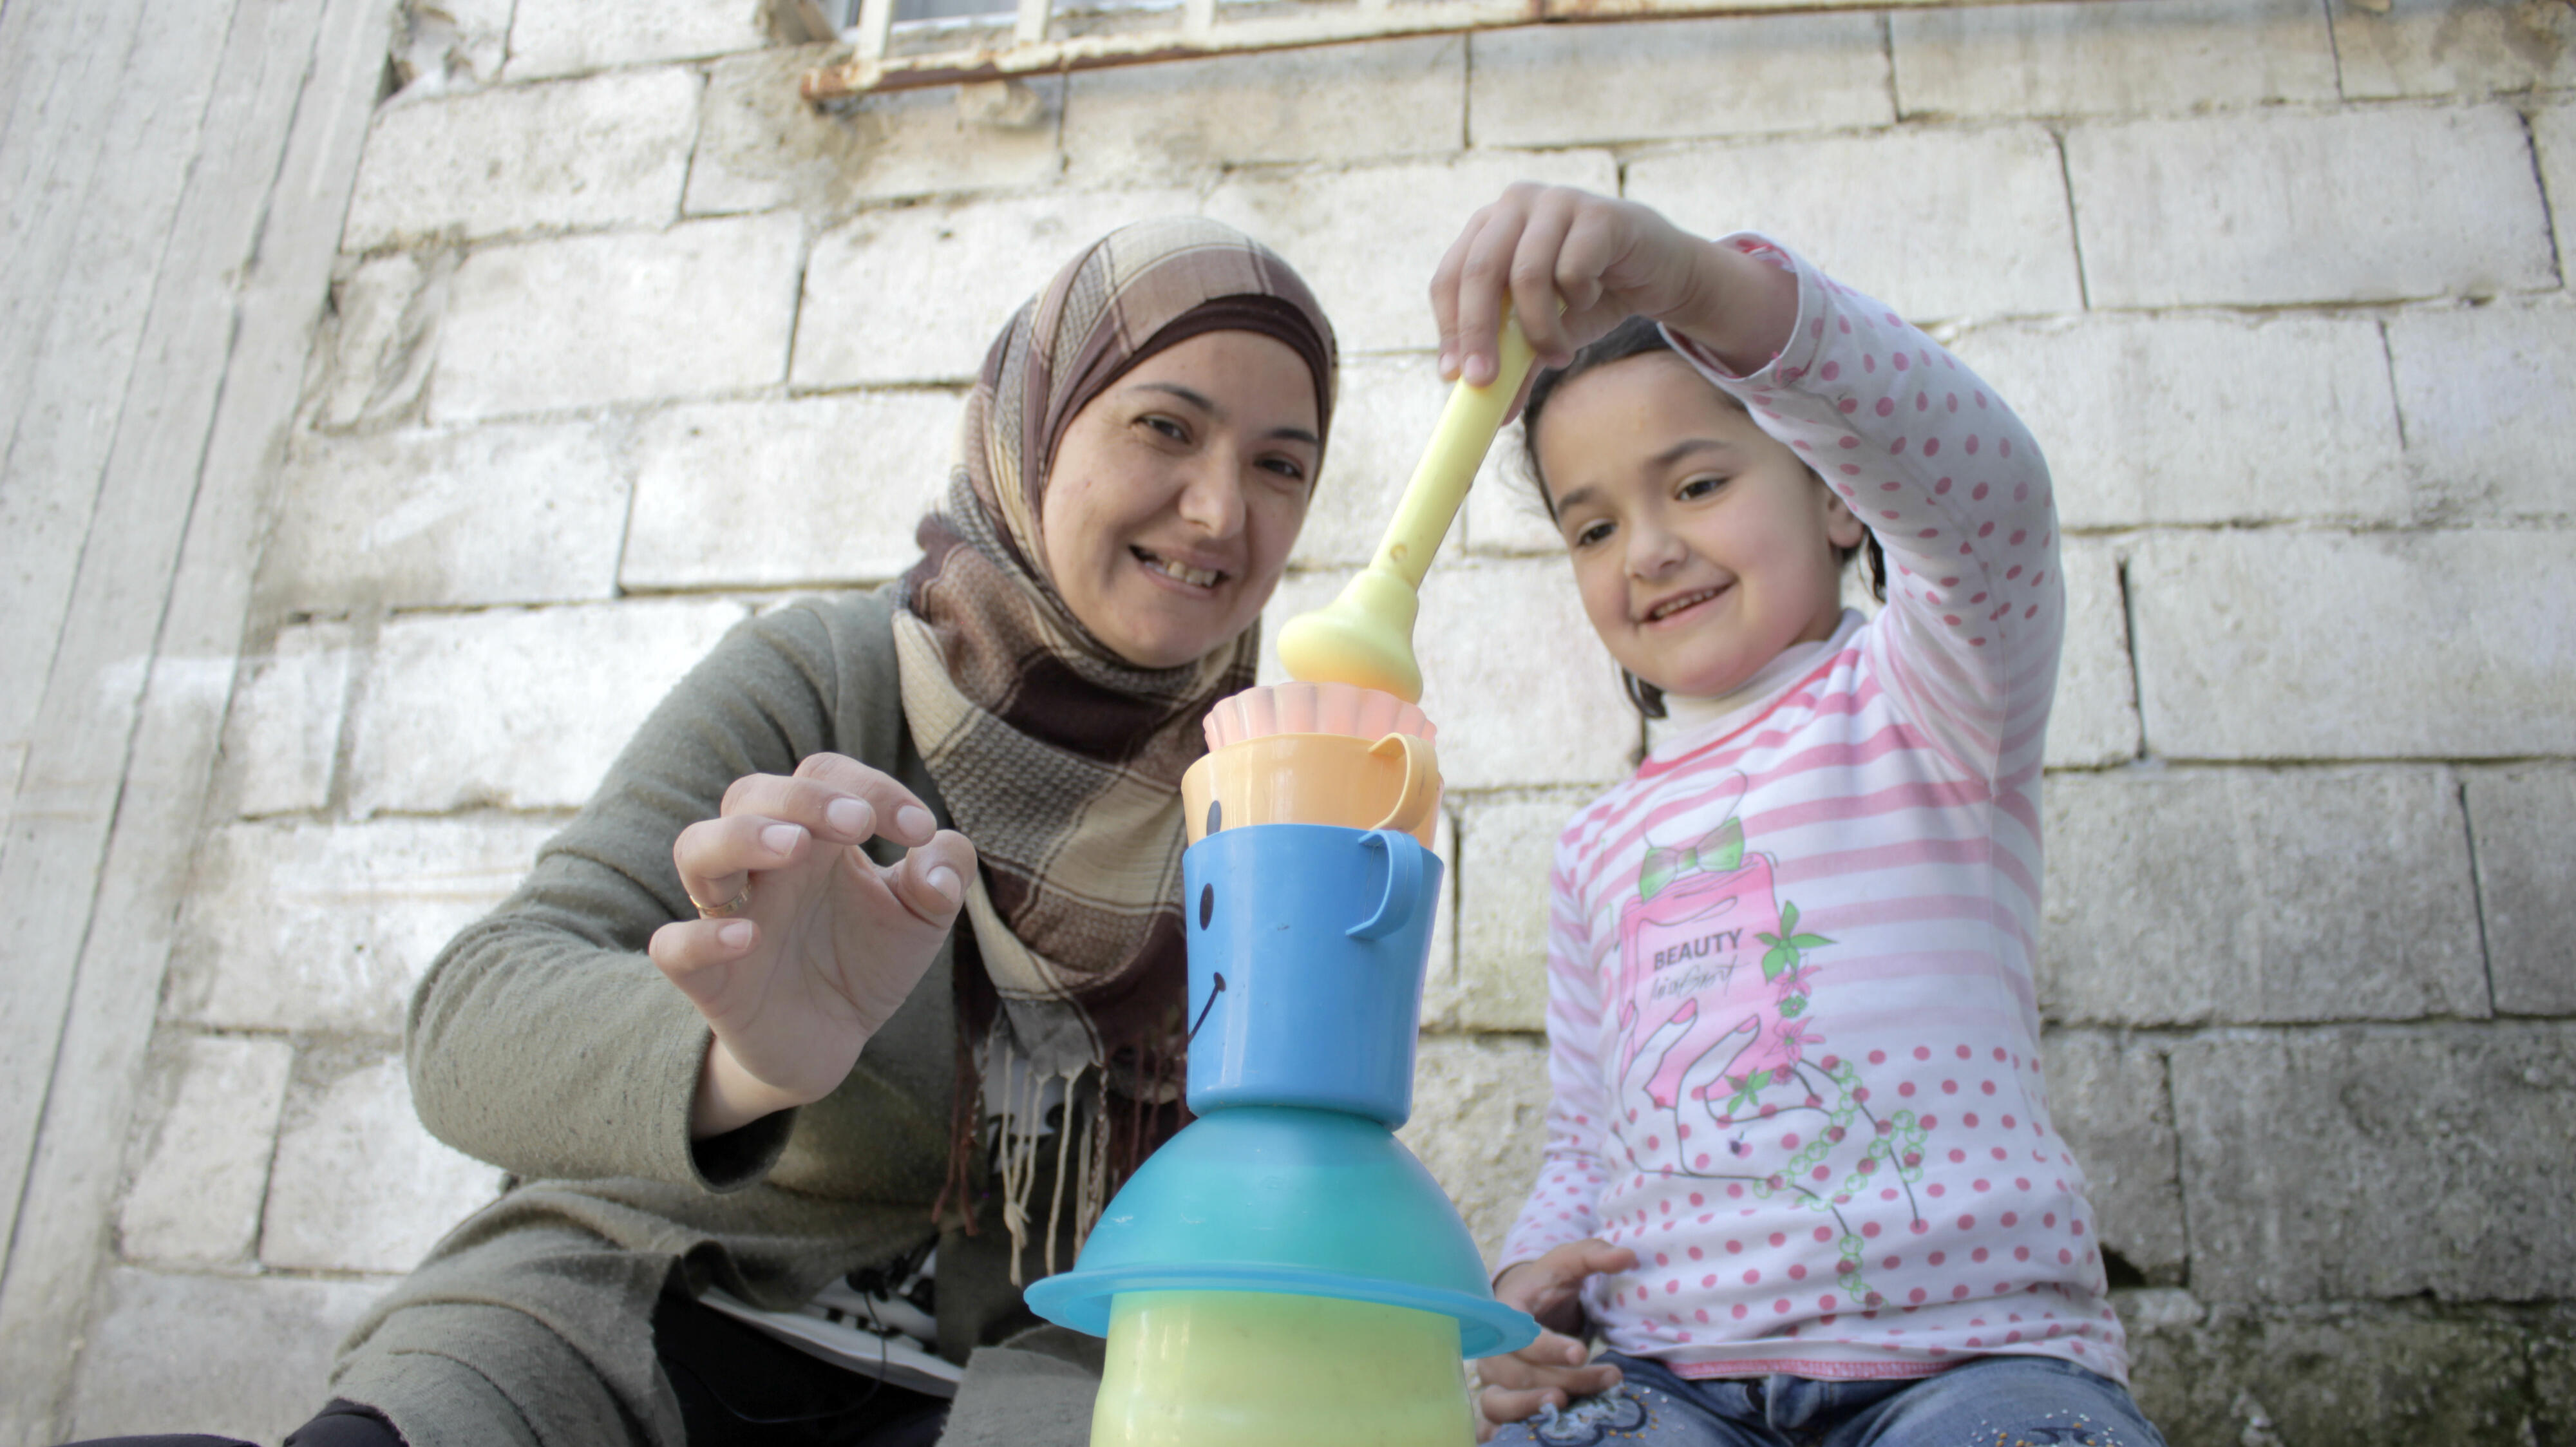 Ahlam and Sadal stack plastic cups as part of a Vroom activity